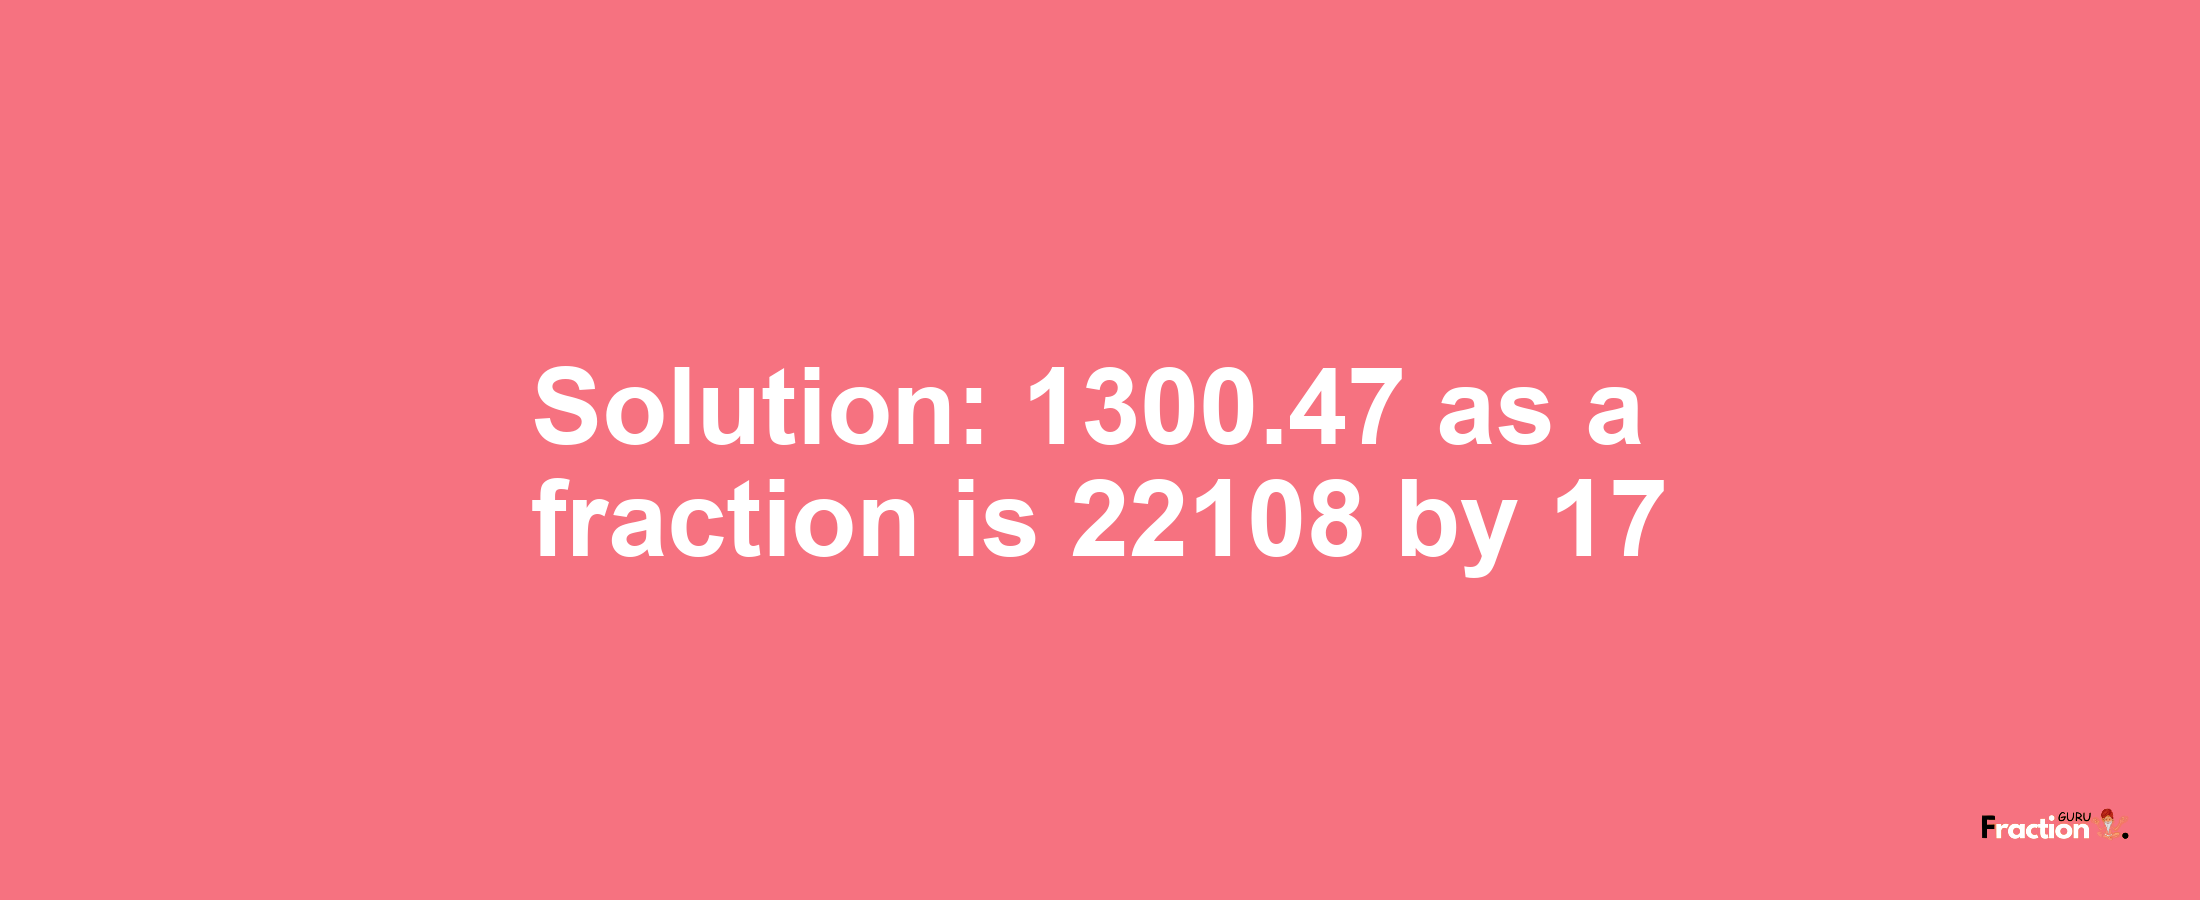 Solution:1300.47 as a fraction is 22108/17